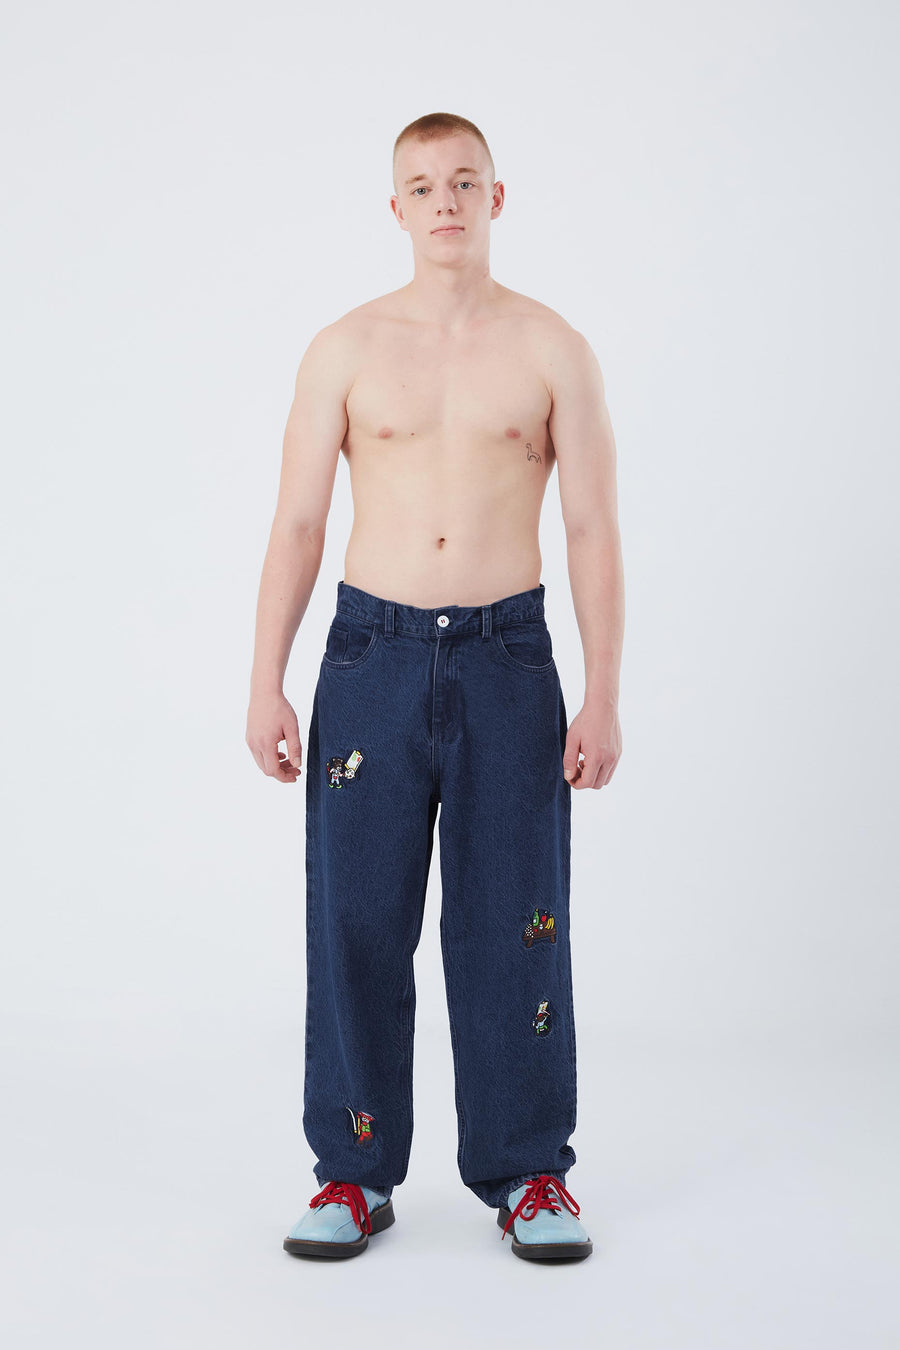 The Art Class trousers